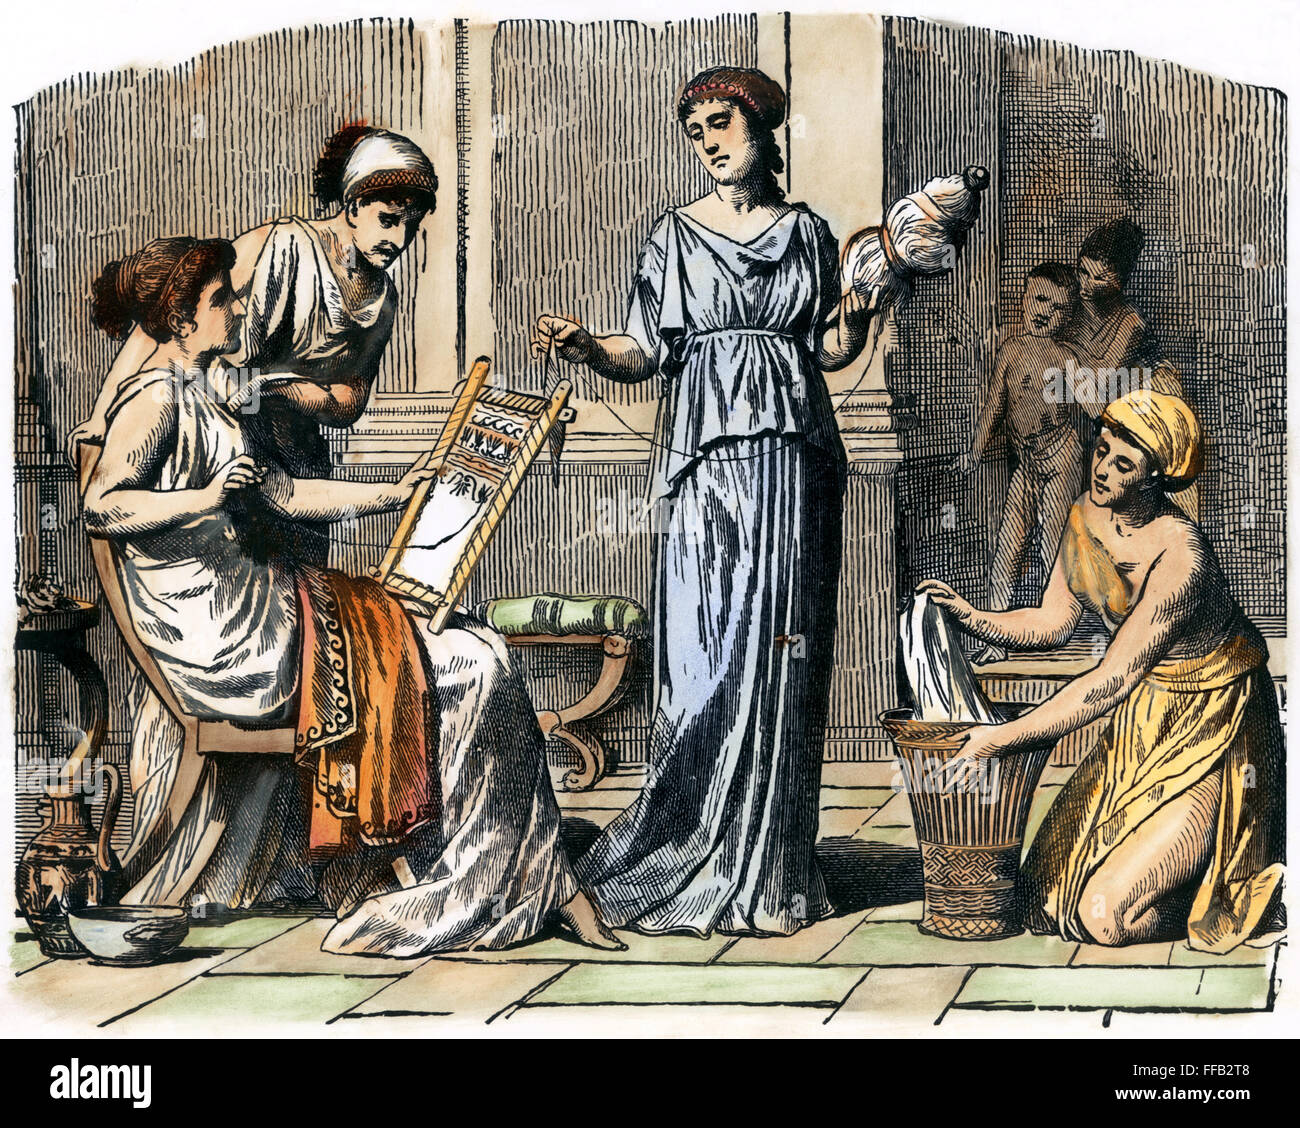 WOMEN OF ANCIENT GREECE /nperforming household chores. Wood engraving, late 19th century. Stock Photo